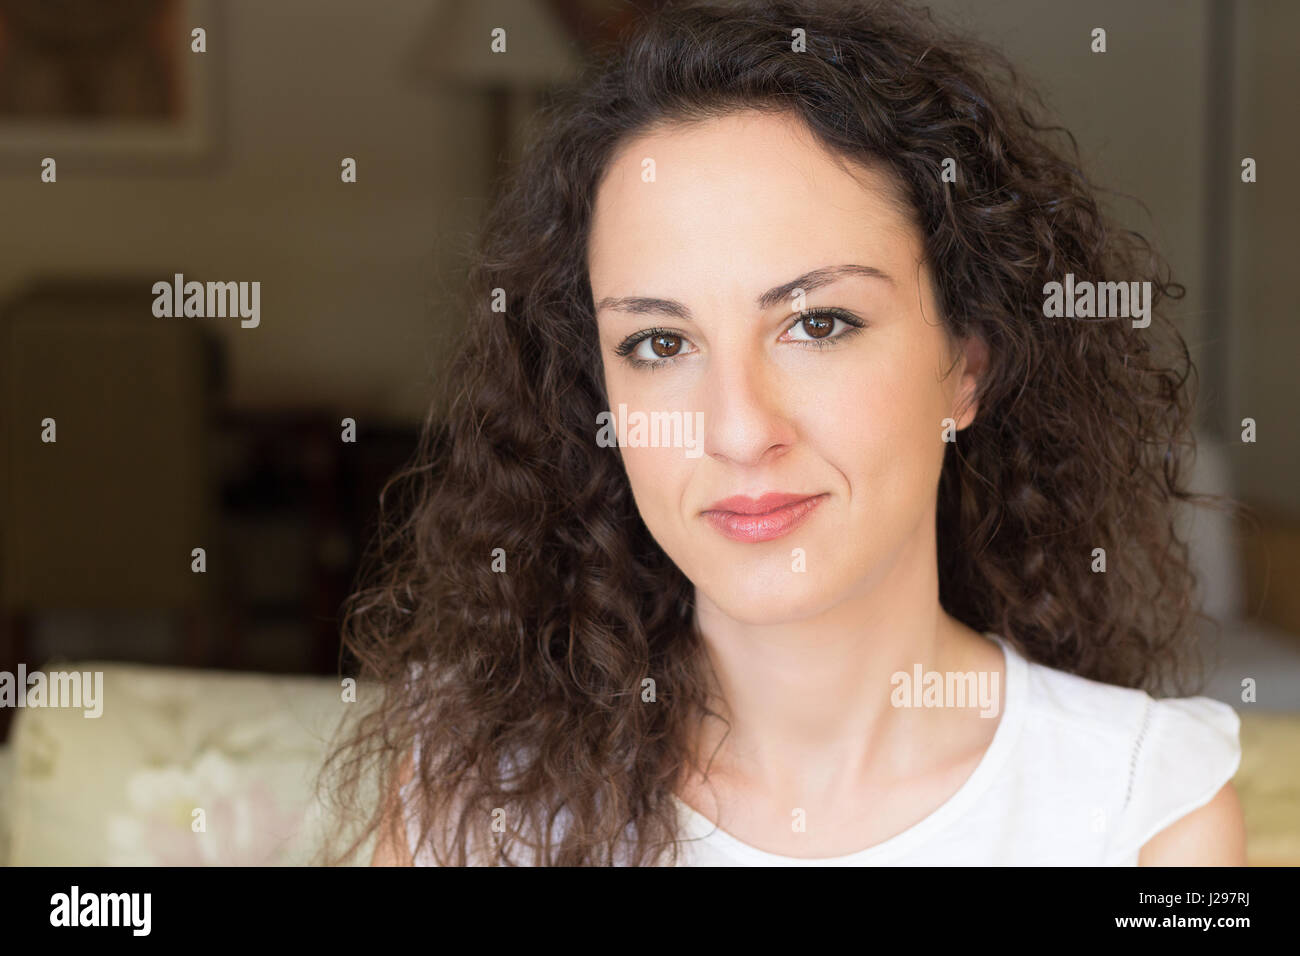 Portrait of a woman of 31 years old looking at camera in a confident way, curly and long hair, caucasian, greek. Stock Photo